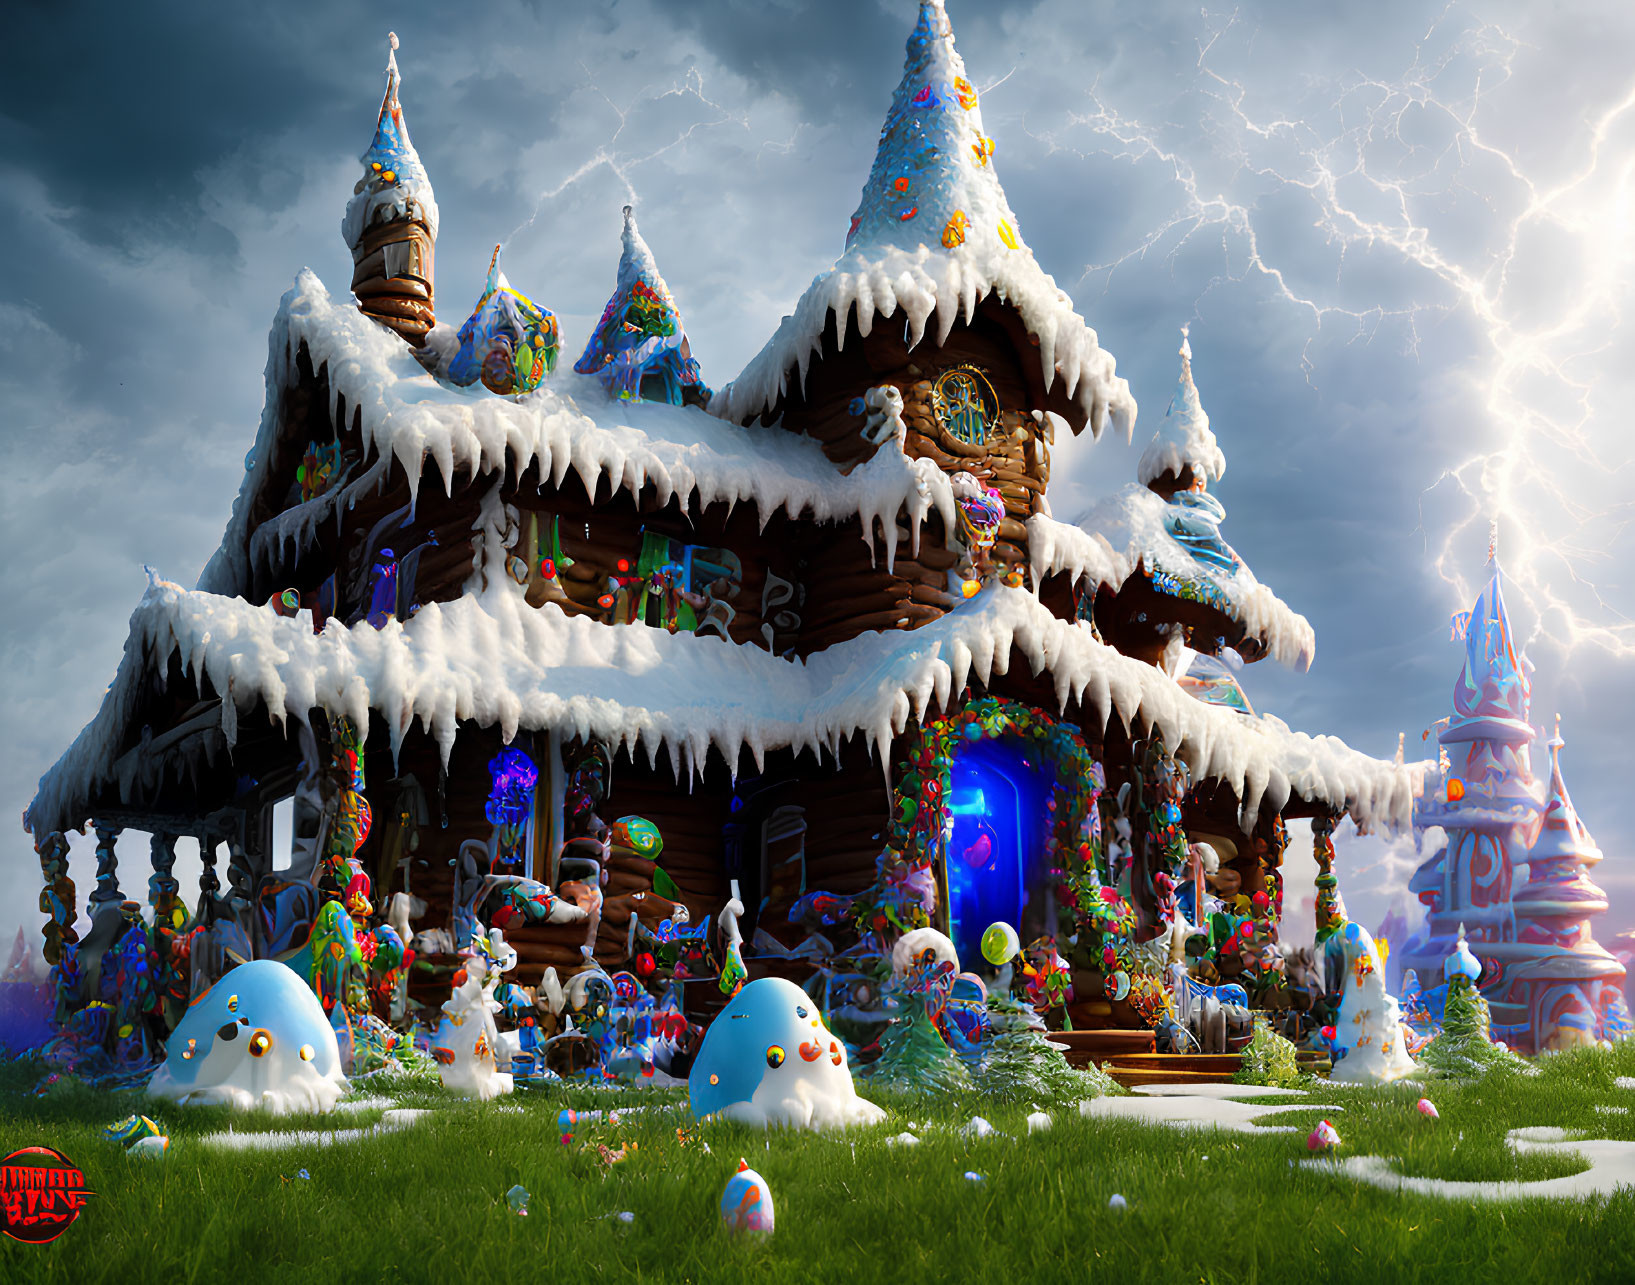 Whimsical gingerbread house in snowy landscape with candy canes and stormy sky